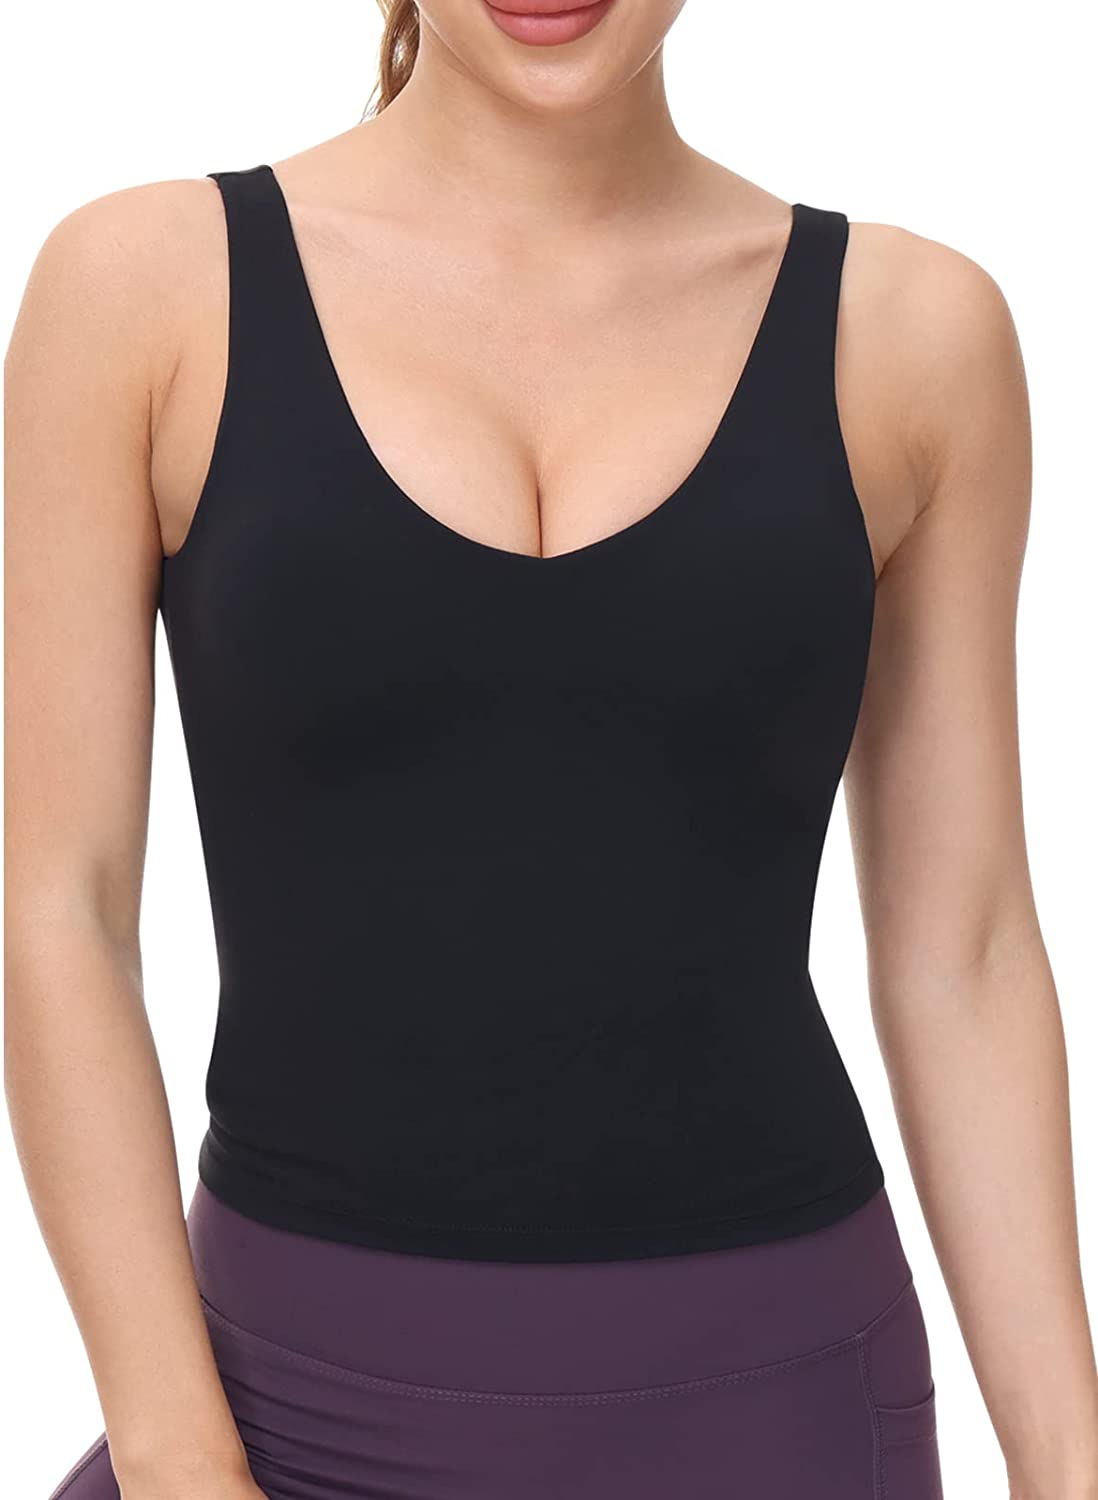 Workout Tops for Women Yoga Tank Tops with Built in Bra Wirefree Padded Yoga  Bra